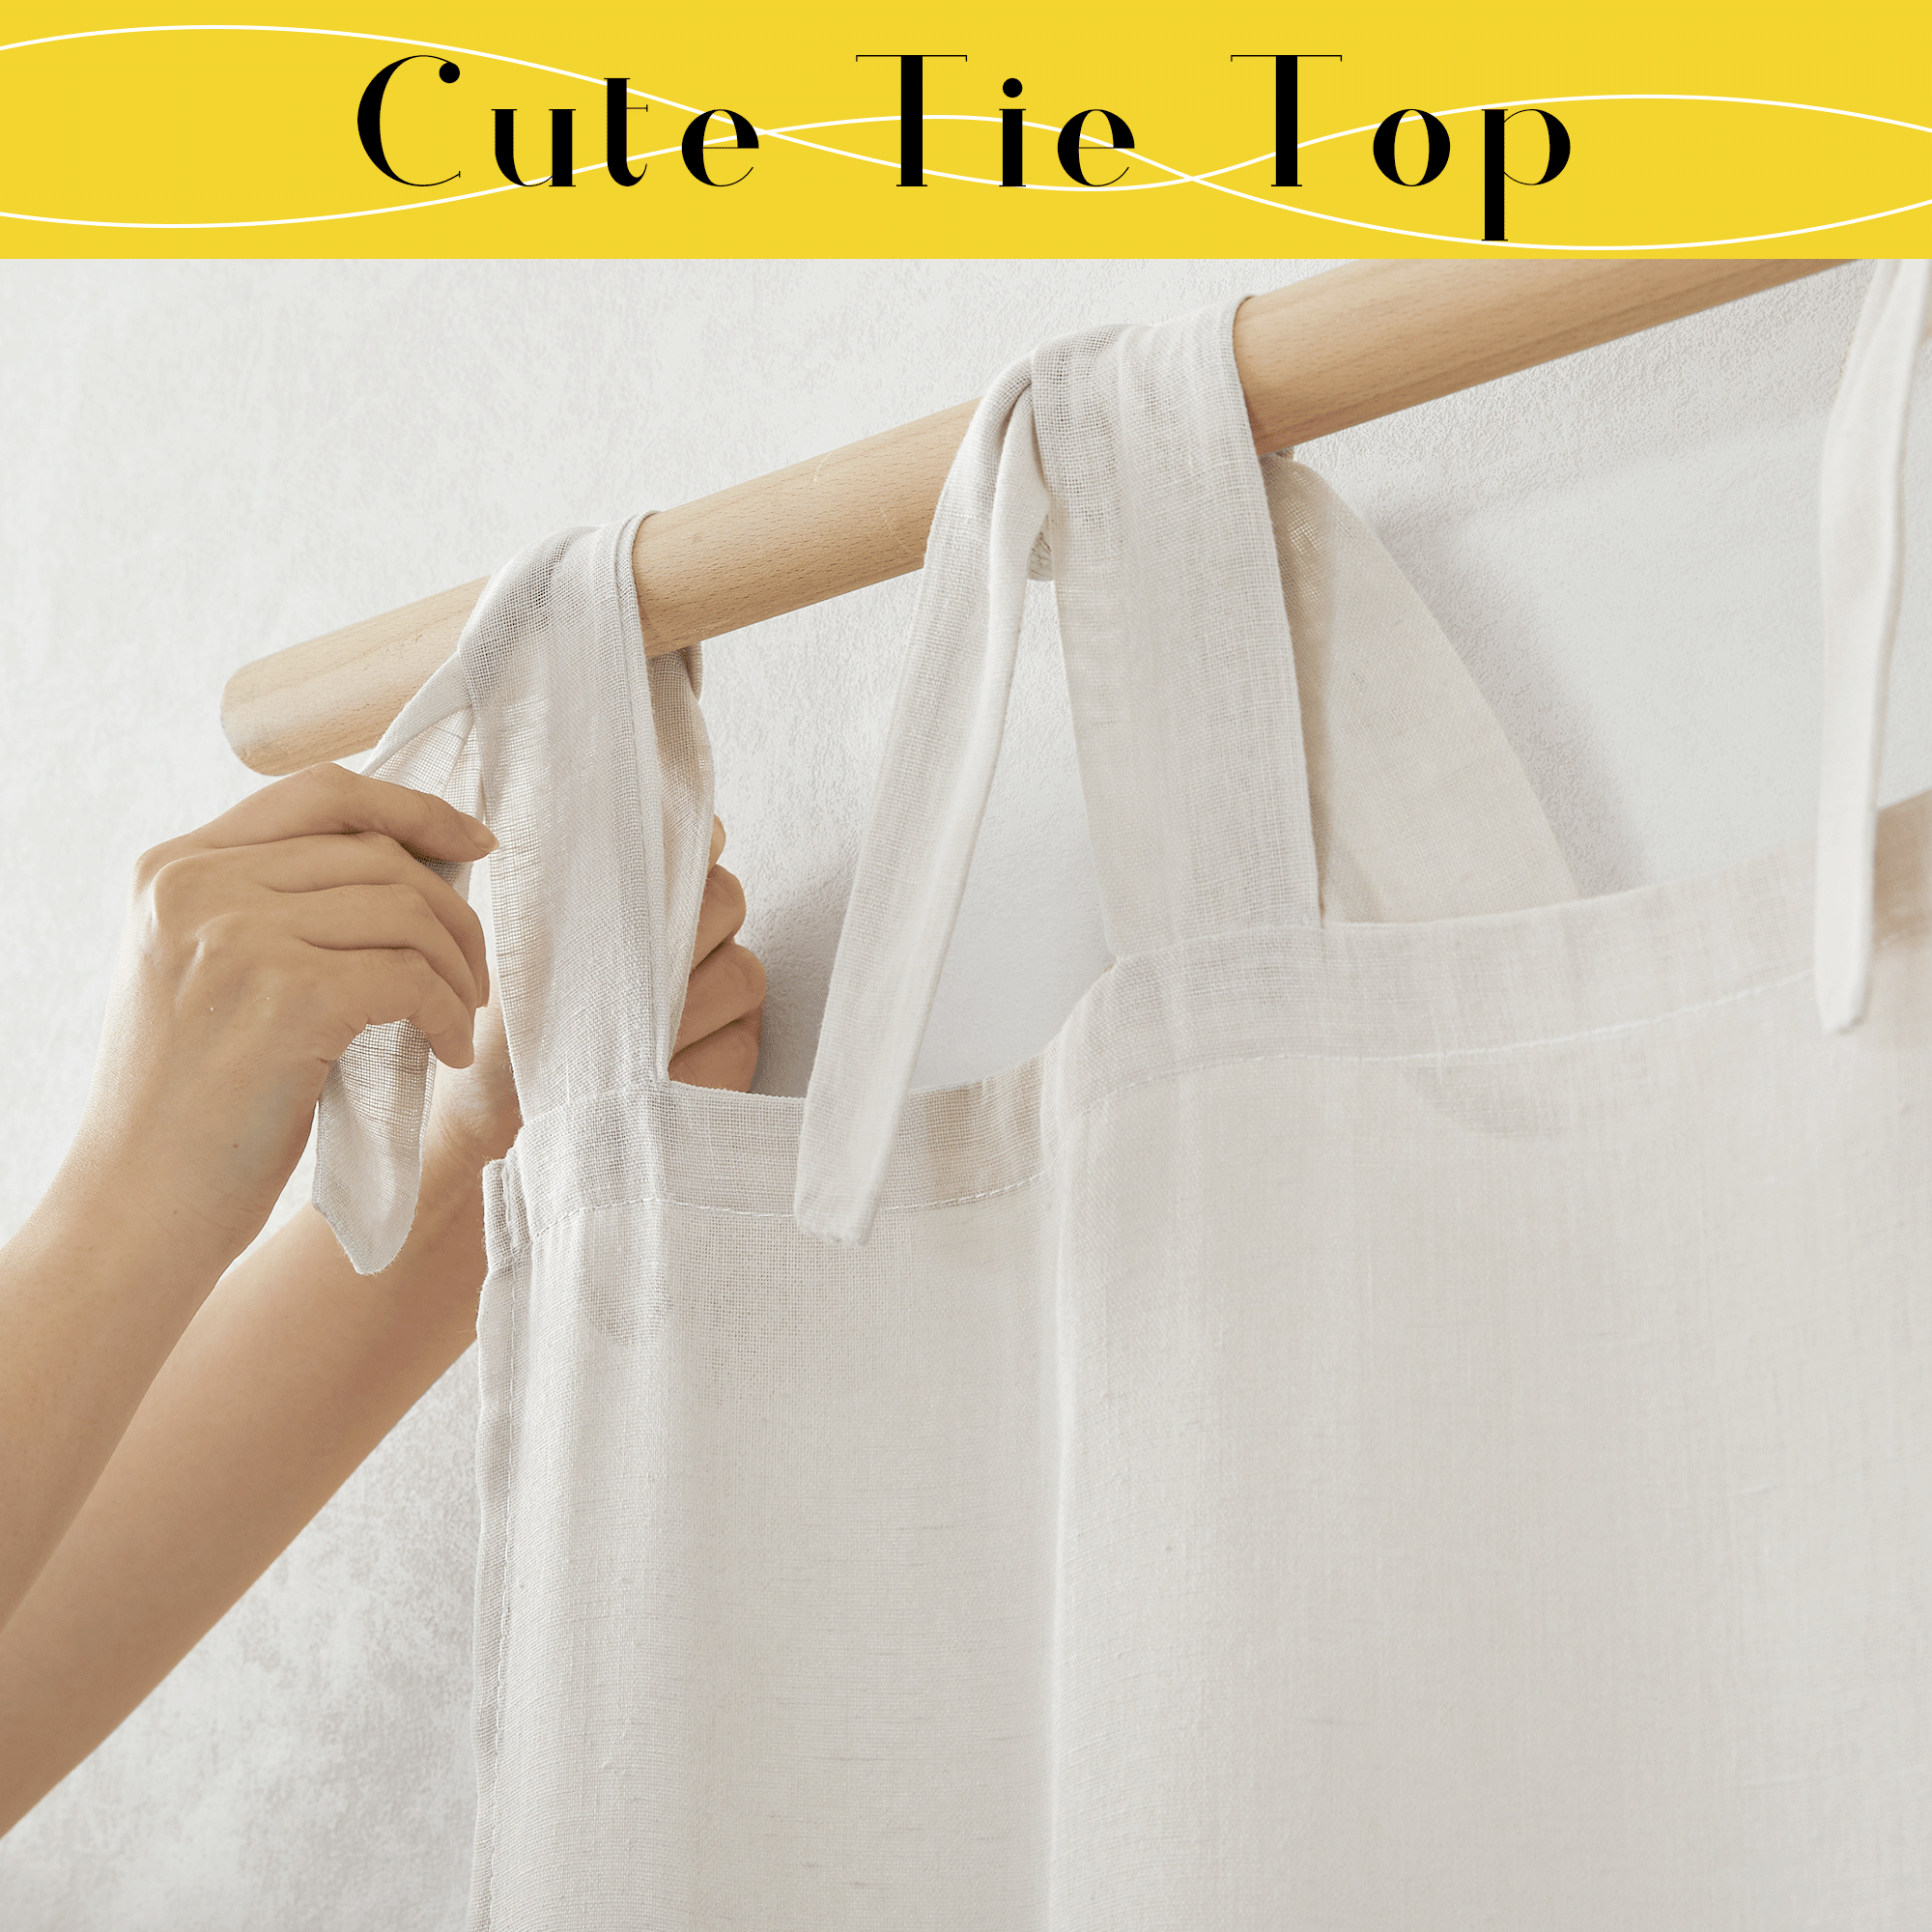 Adjustable Tie Top DIY Crafted Semi Sheer Natural Linen Blend Eclectic Privacy Rabbit Ear Curtains for Bedroom / Living Room KGORGE Store